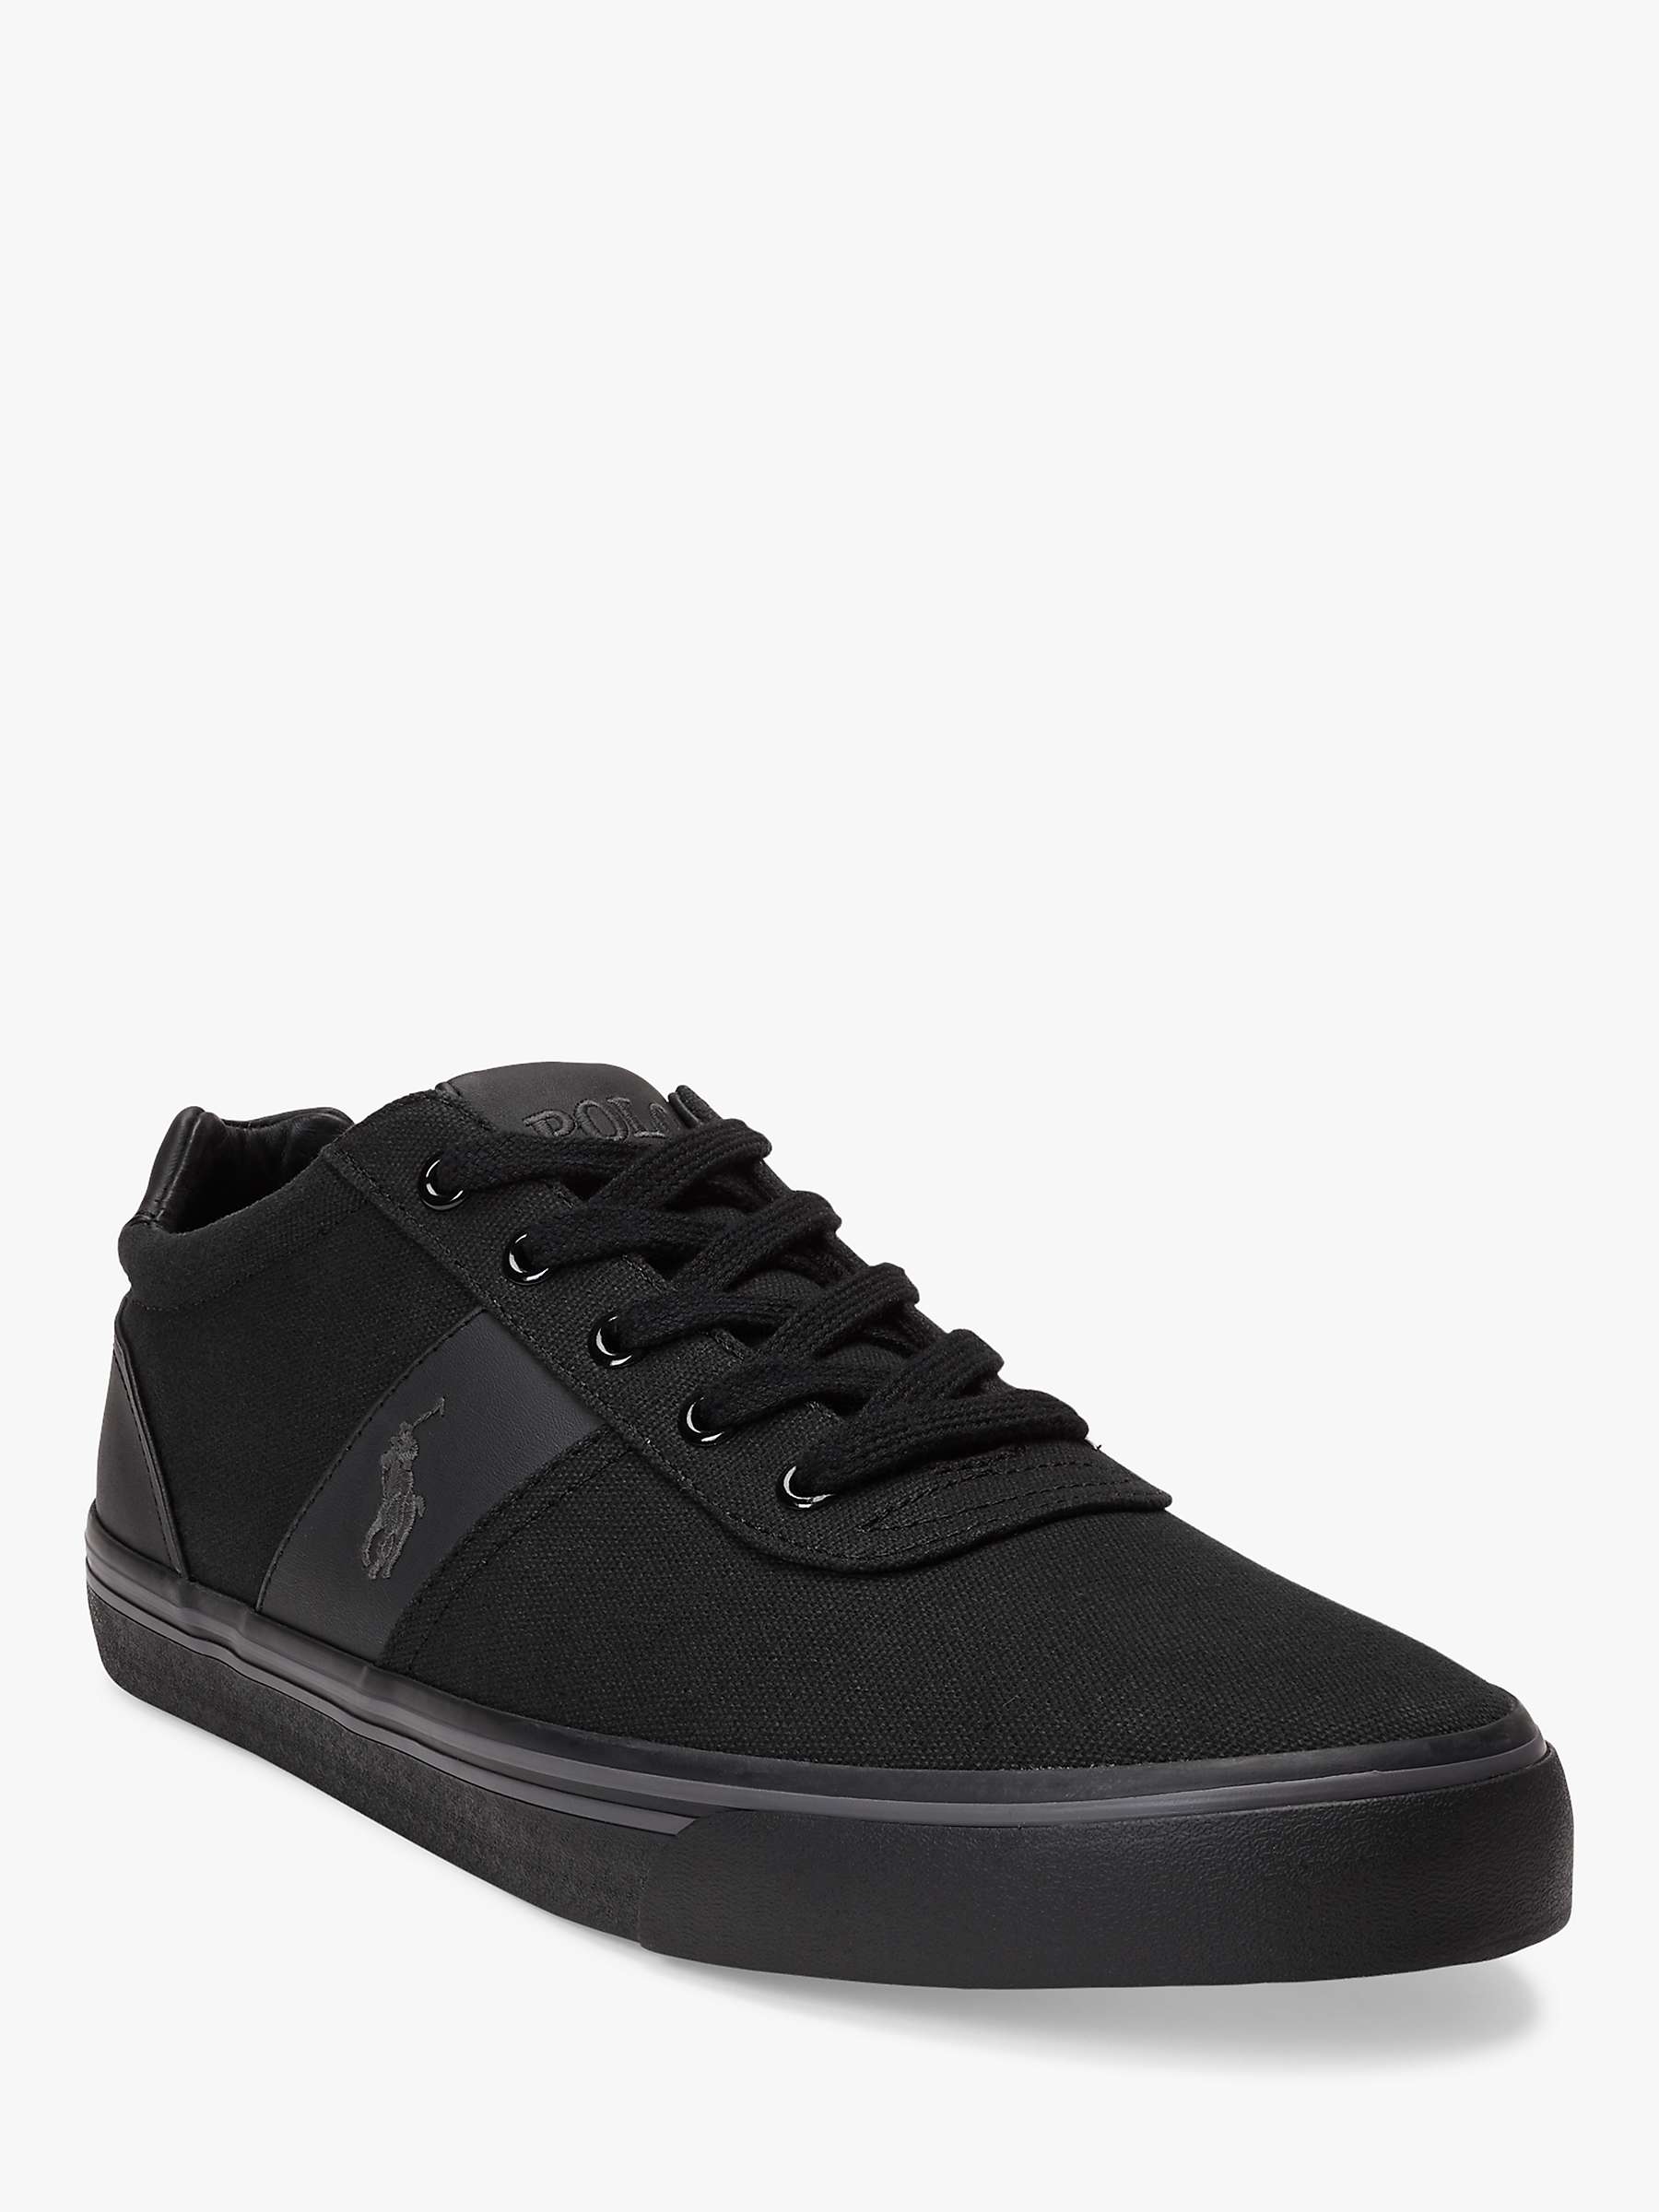 Buy Polo Ralph Lauren Hanford Canvas Trainers Online at johnlewis.com